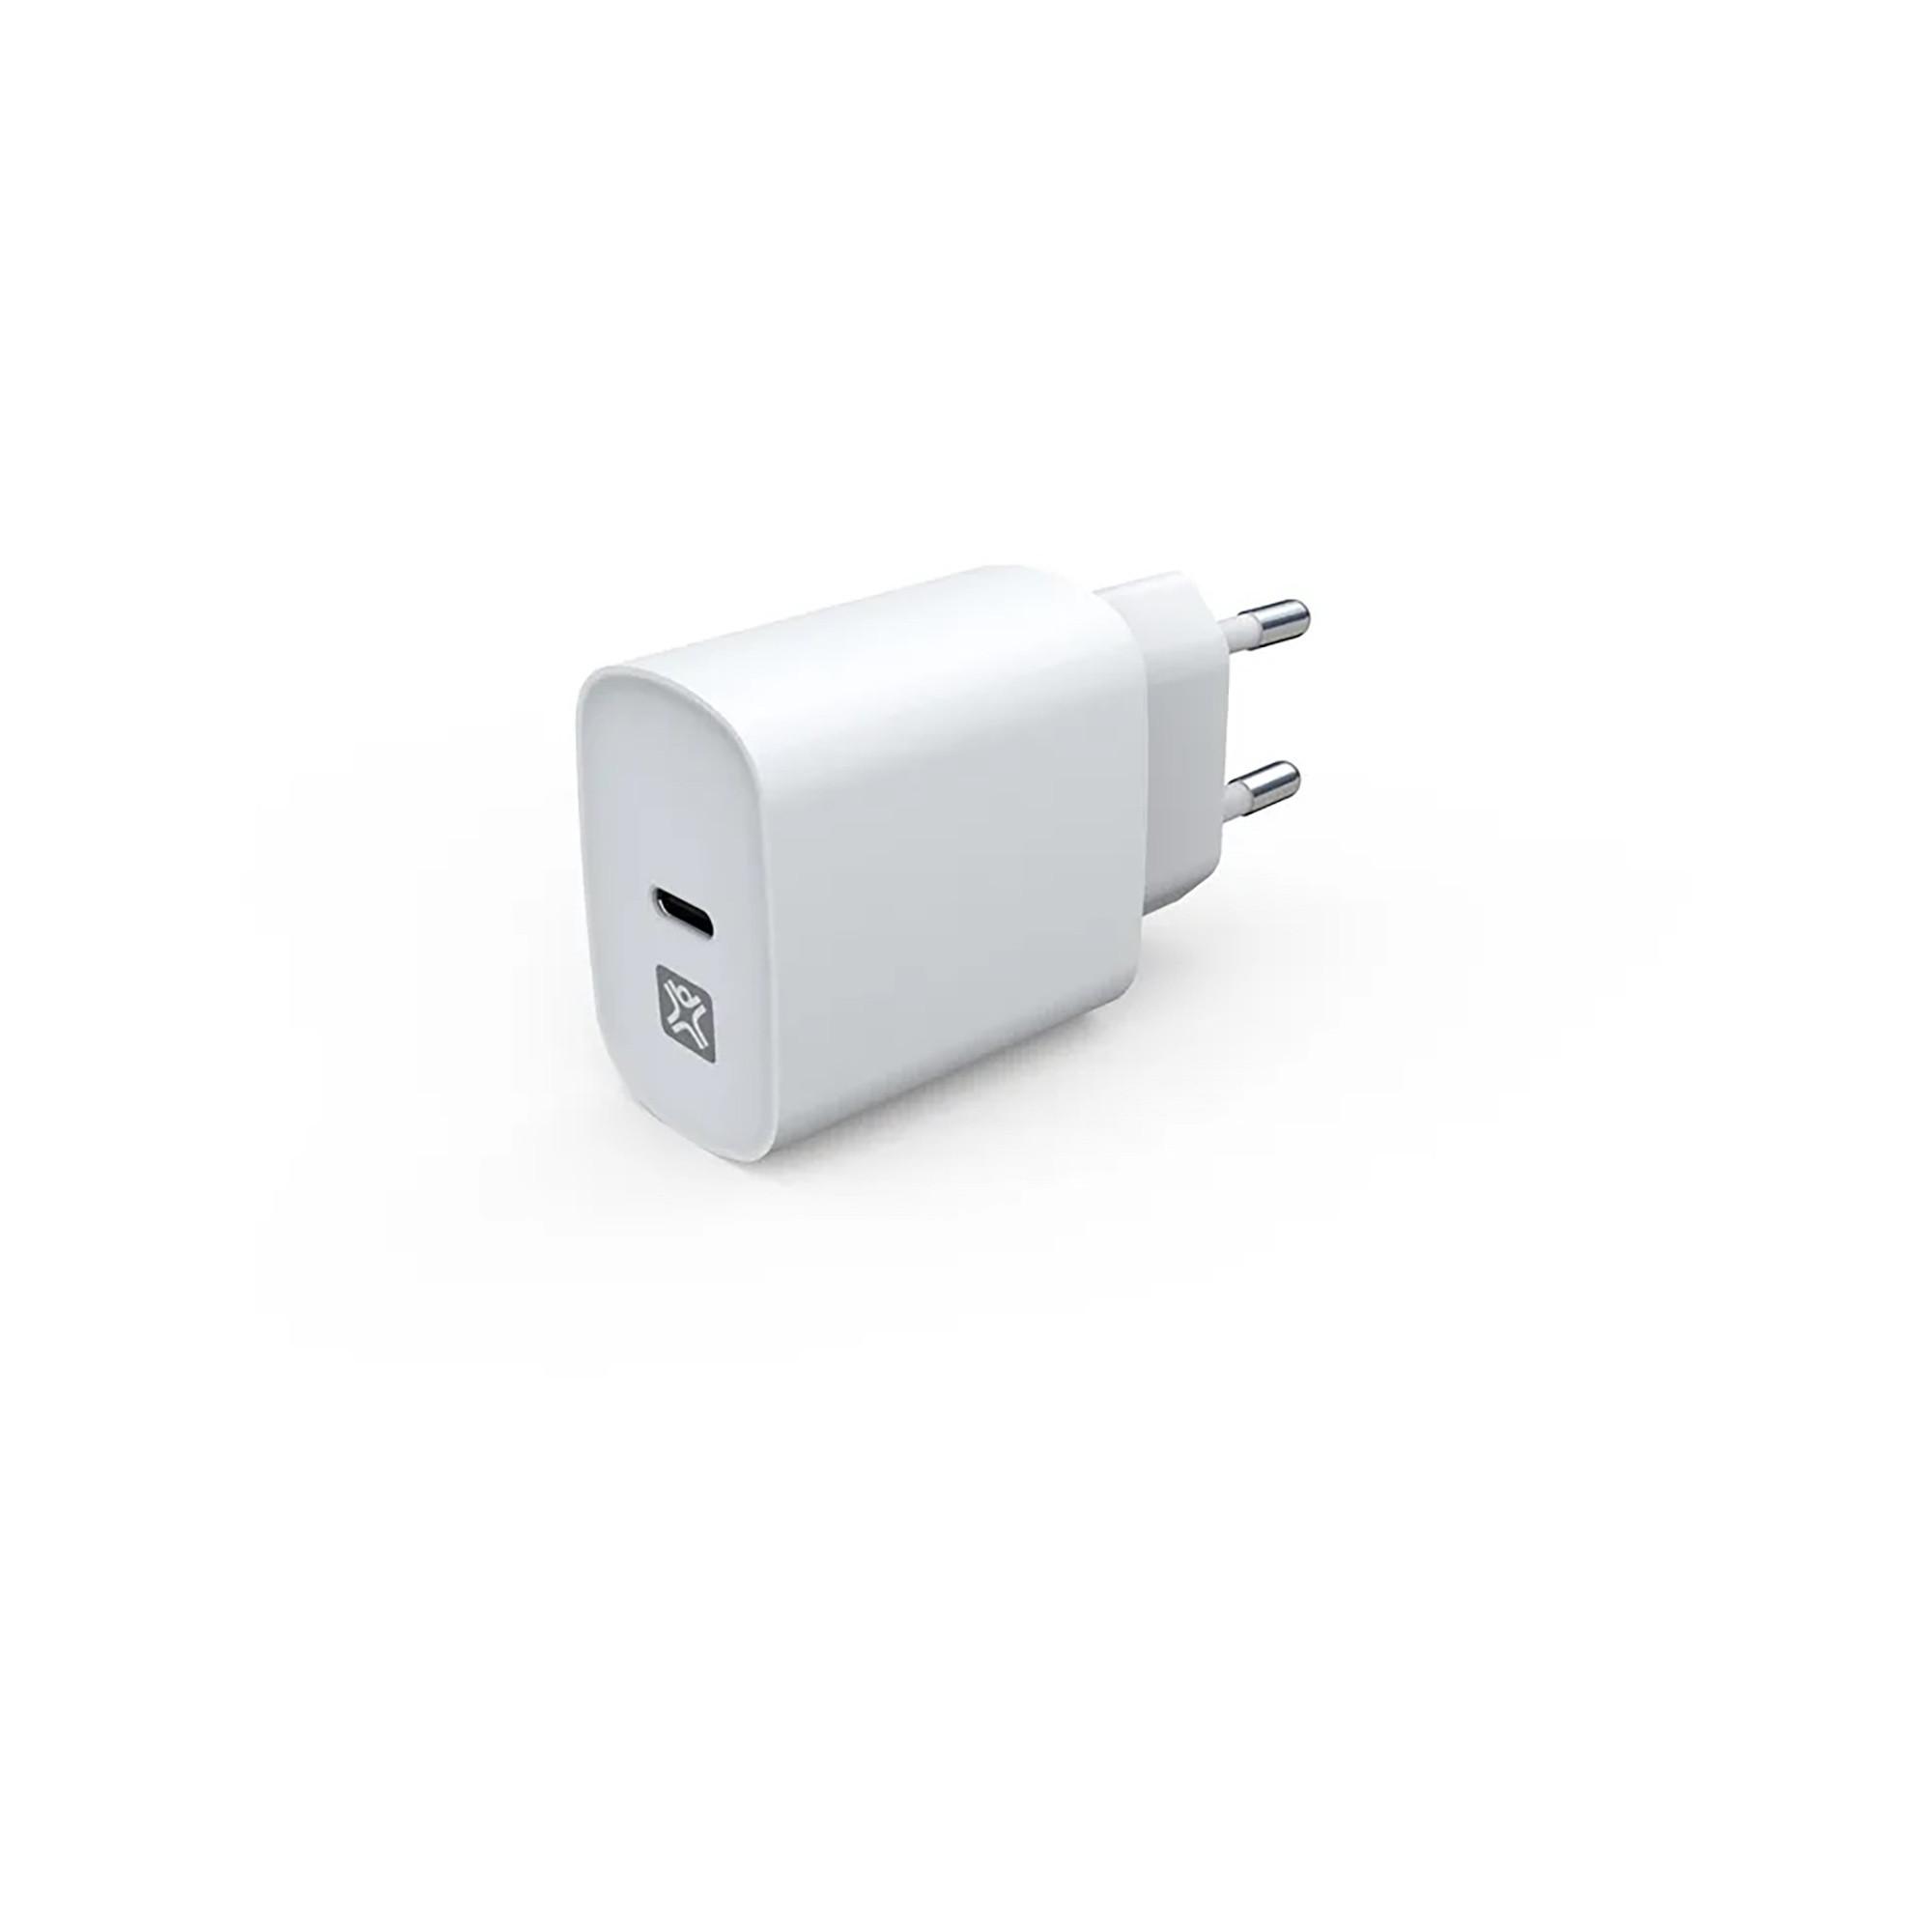 XtremeMac POWER DELIVERY USB-C 20W WALL CHARGER USB Charger
 